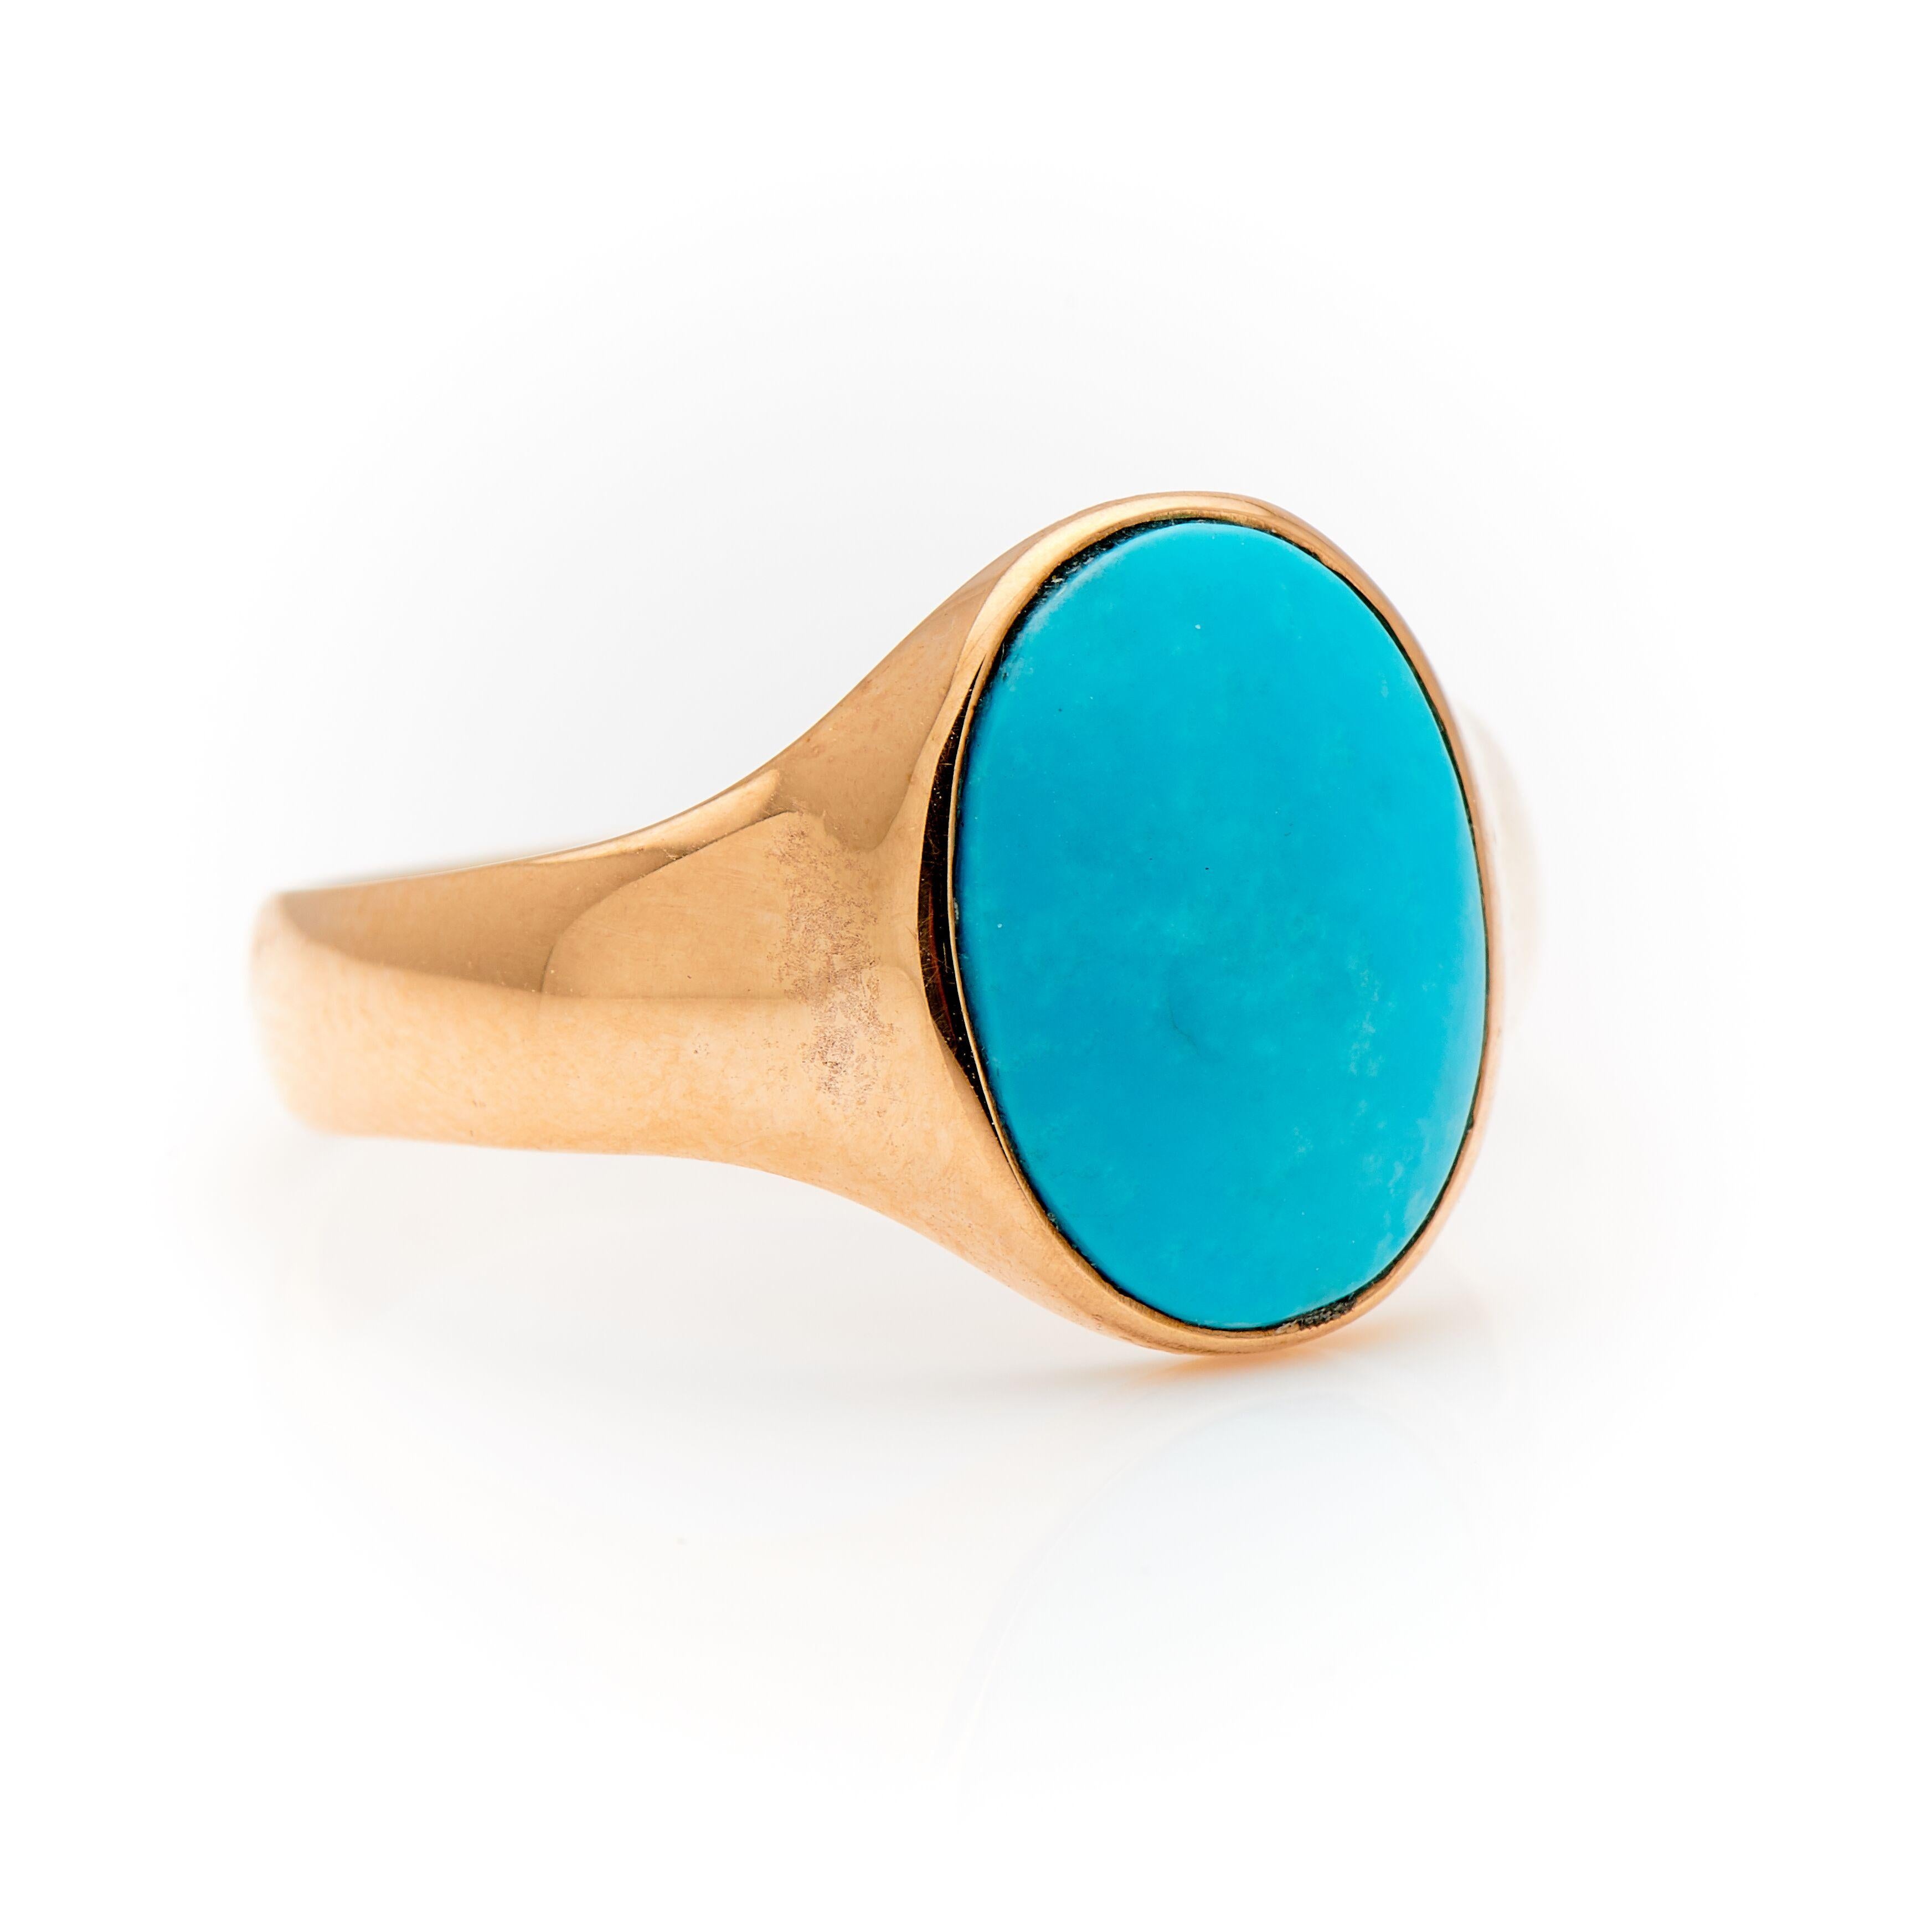 Art Deco, turquoise signet ring, circa 1925. This is a beautifully simple ring. A stunning piece of natural turquoise of robin-egg blue hue is set centre in a plain gold rub-over style setting. This ring is so easy to wear, as it sits flat on the